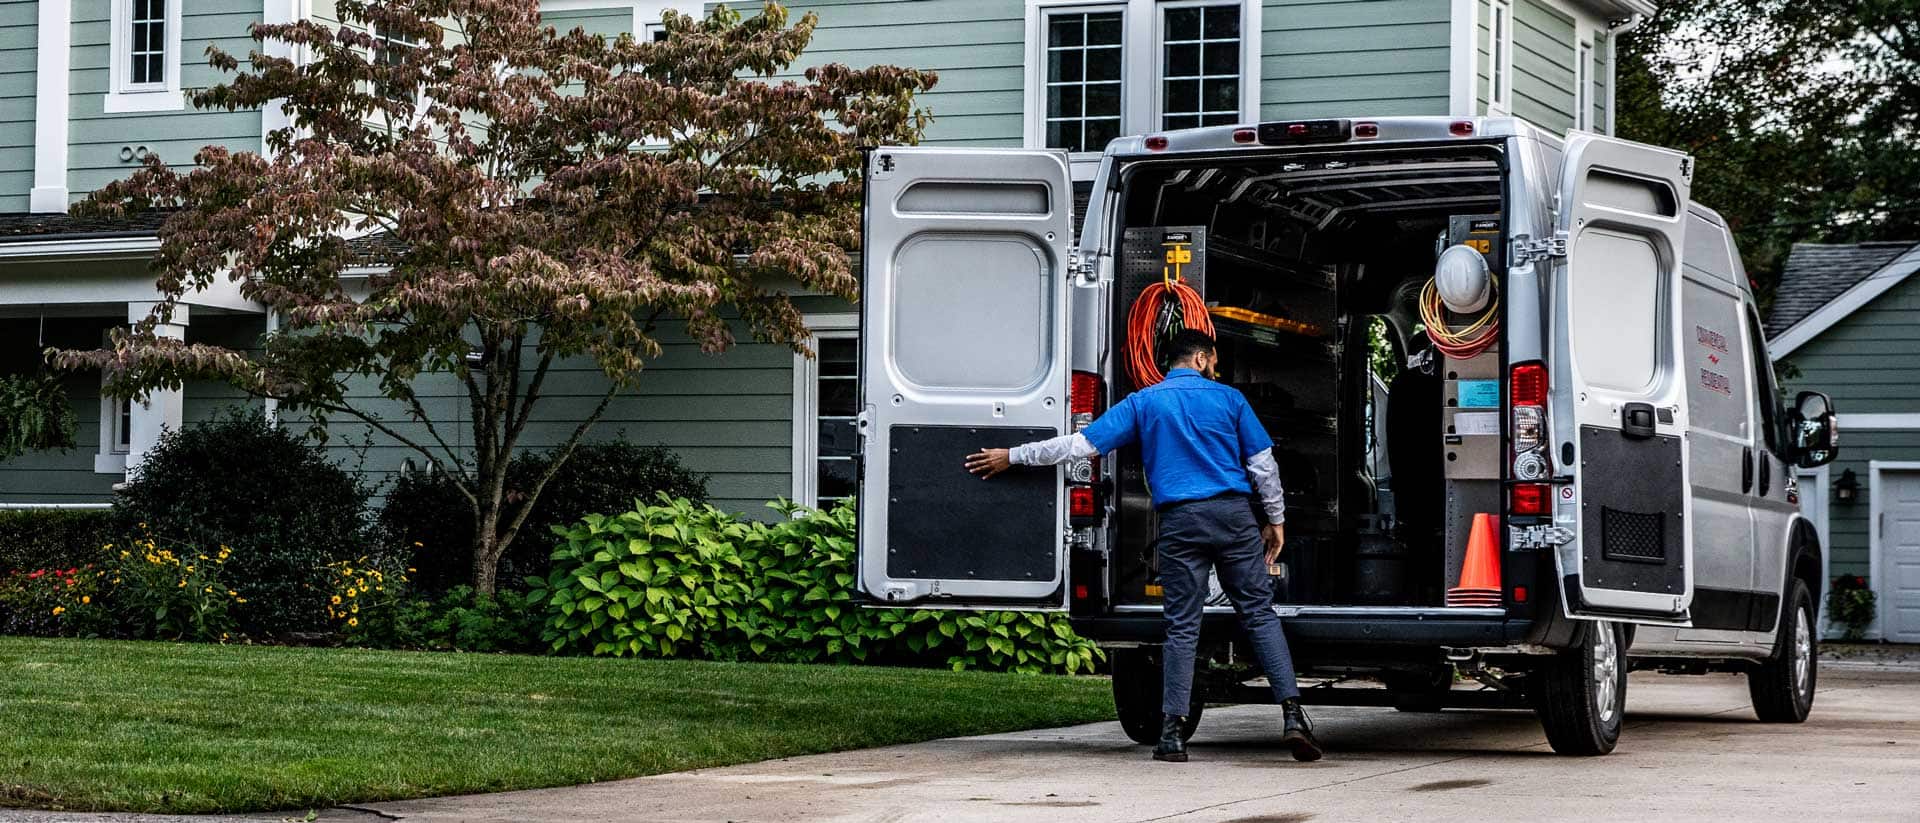 A 2021 Ram ProMaster 1500 with an electrician upfit, its rear doors open—revealing a cargo area full of equipment, parked in the driveway of a home.